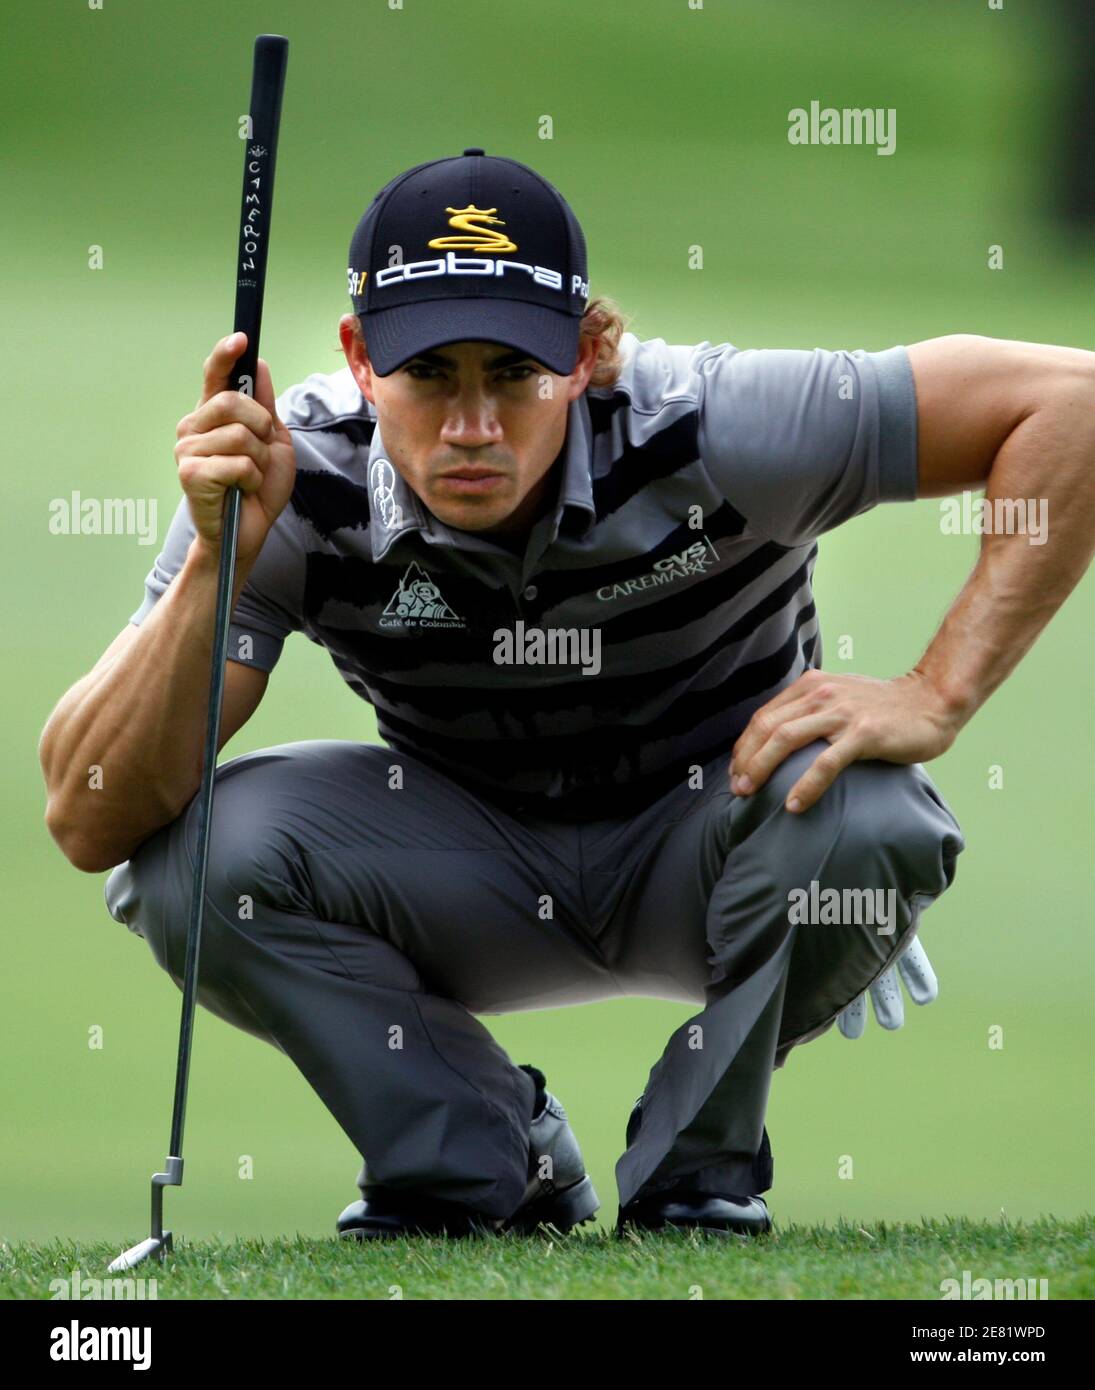 Colombia's Camilo Villegas lines up a putt on the second hole during the third round of the St. Jude Classic at TPC Southwind in Memphis, Tennessee June 13, 2009.   REUTERS/Nikki Boertman    (UNITED STATES SPORT GOLF) Stock Photo